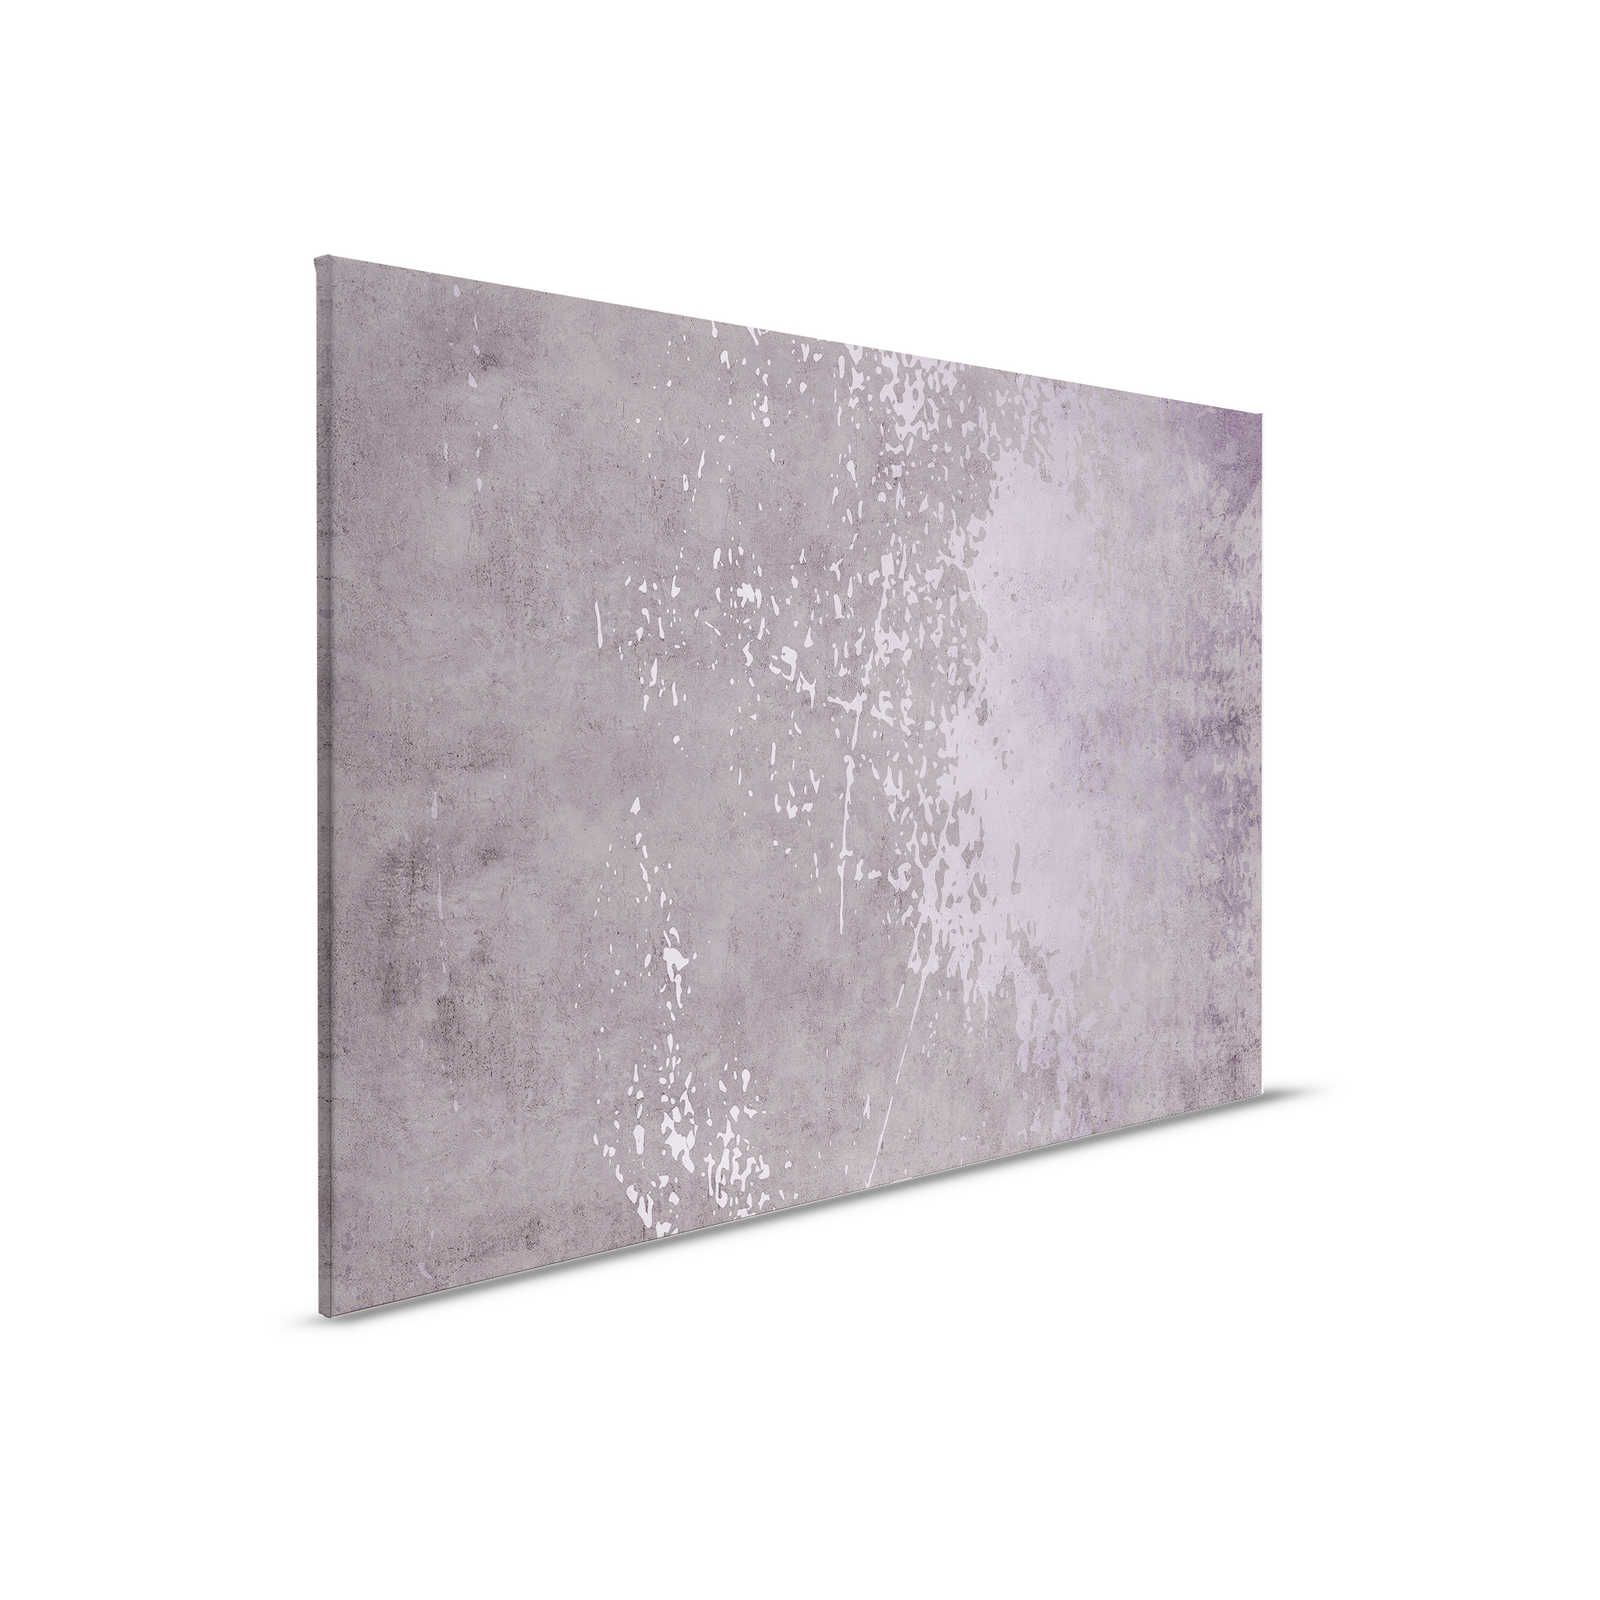         Vintage Wall 2 - Canvas painting lilac plaster look design in used look - 0.90 m x 0.60 m
    